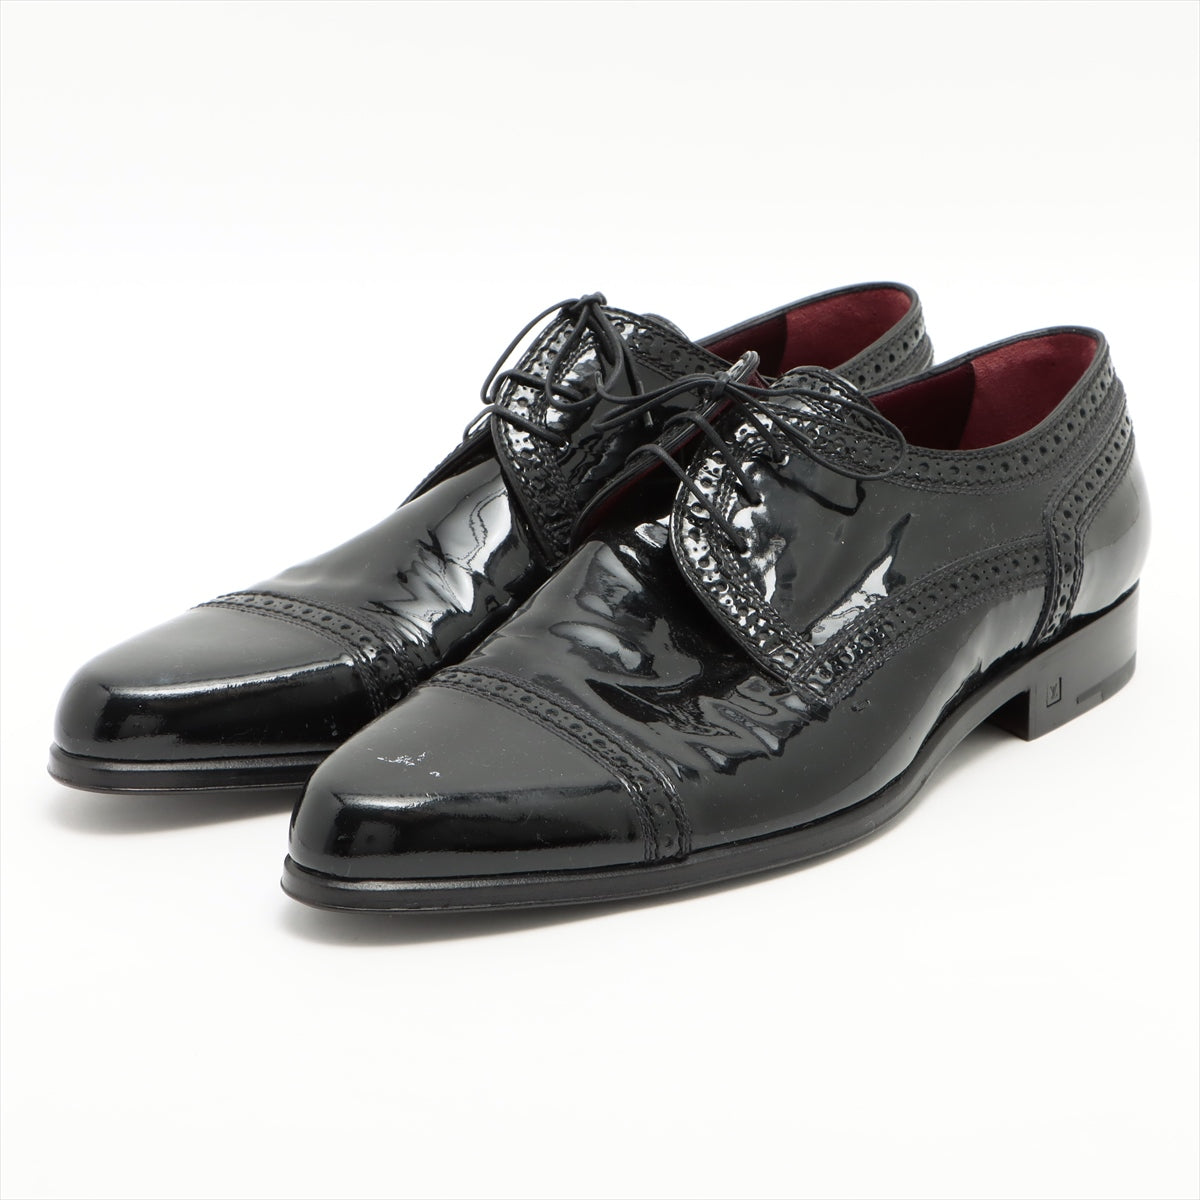 Louis Vuitton 08 Patent leather Leather shoes 10 Men's Black NI0028 There is stickiness